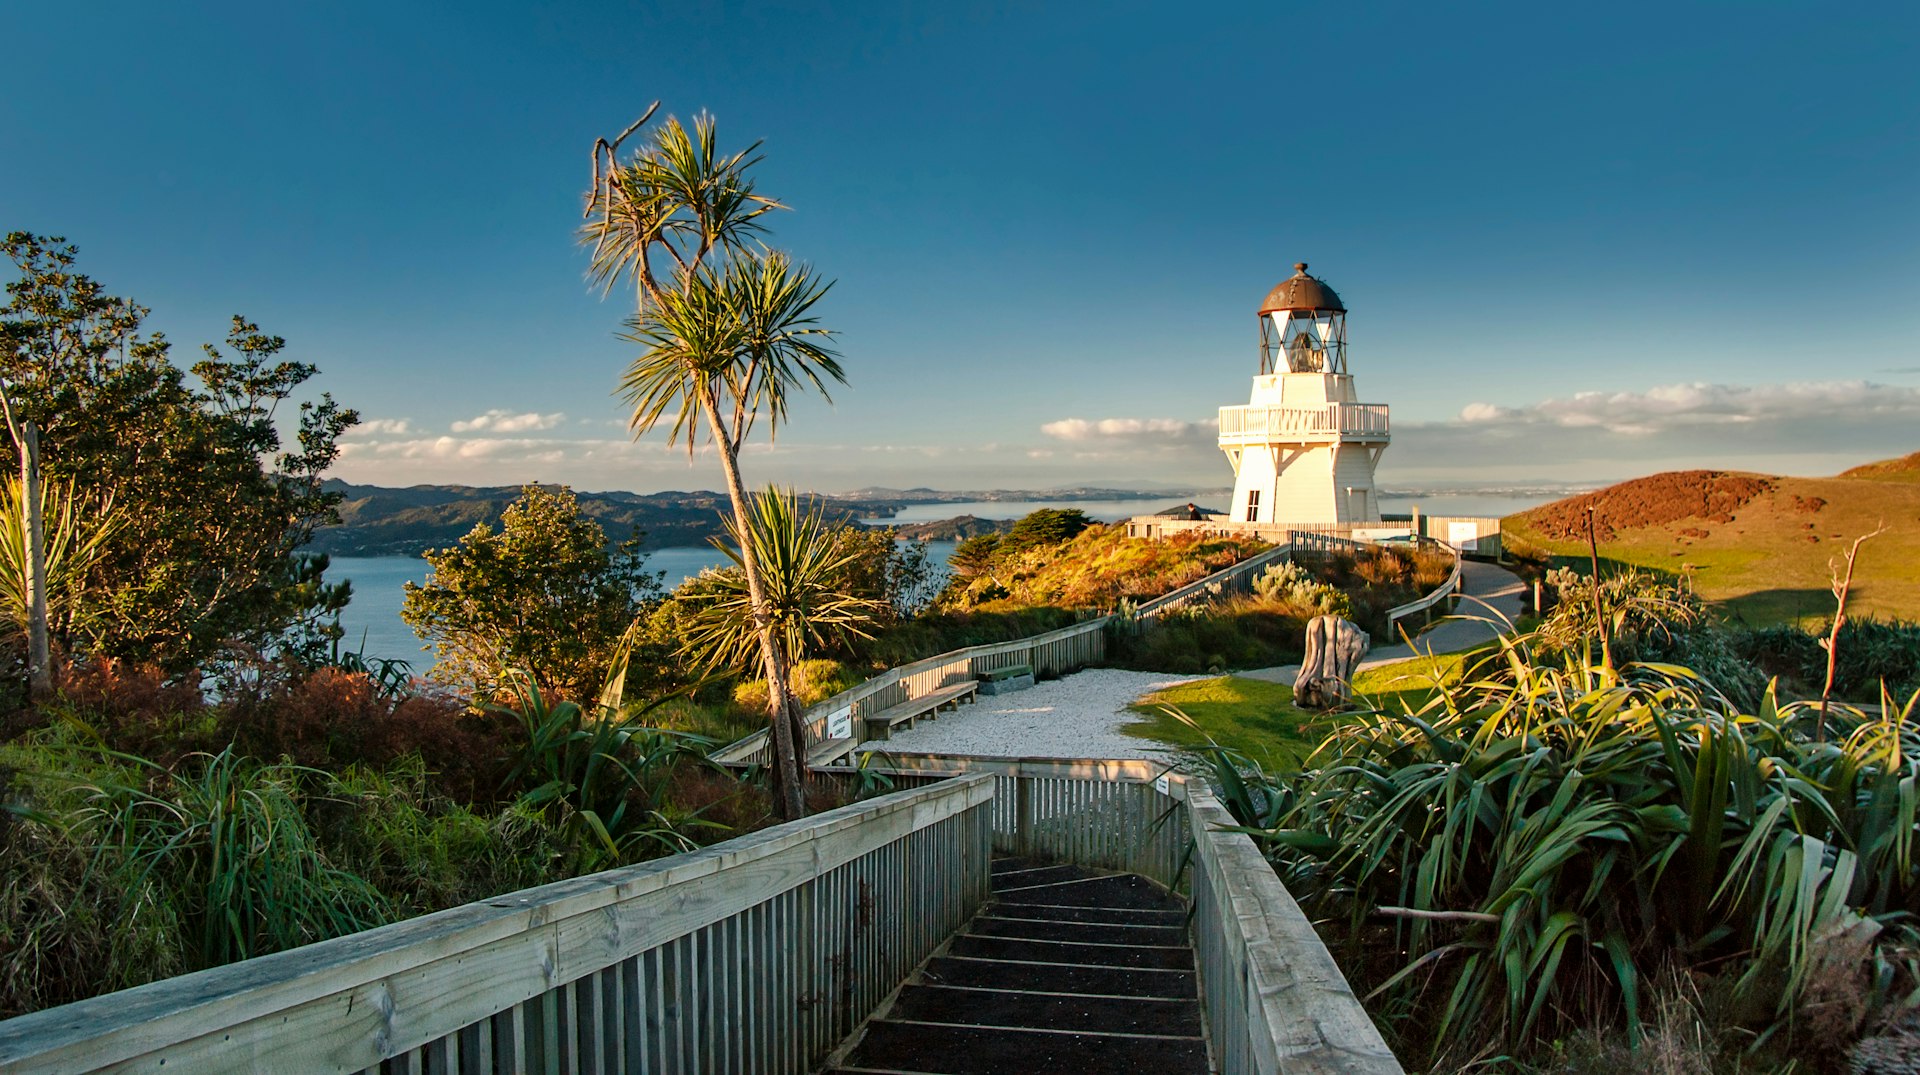 A wooden catwalk leads to the Manukau Heads Lighthouse, with trees and greenery plus a view of the Tasman Sea in the distance